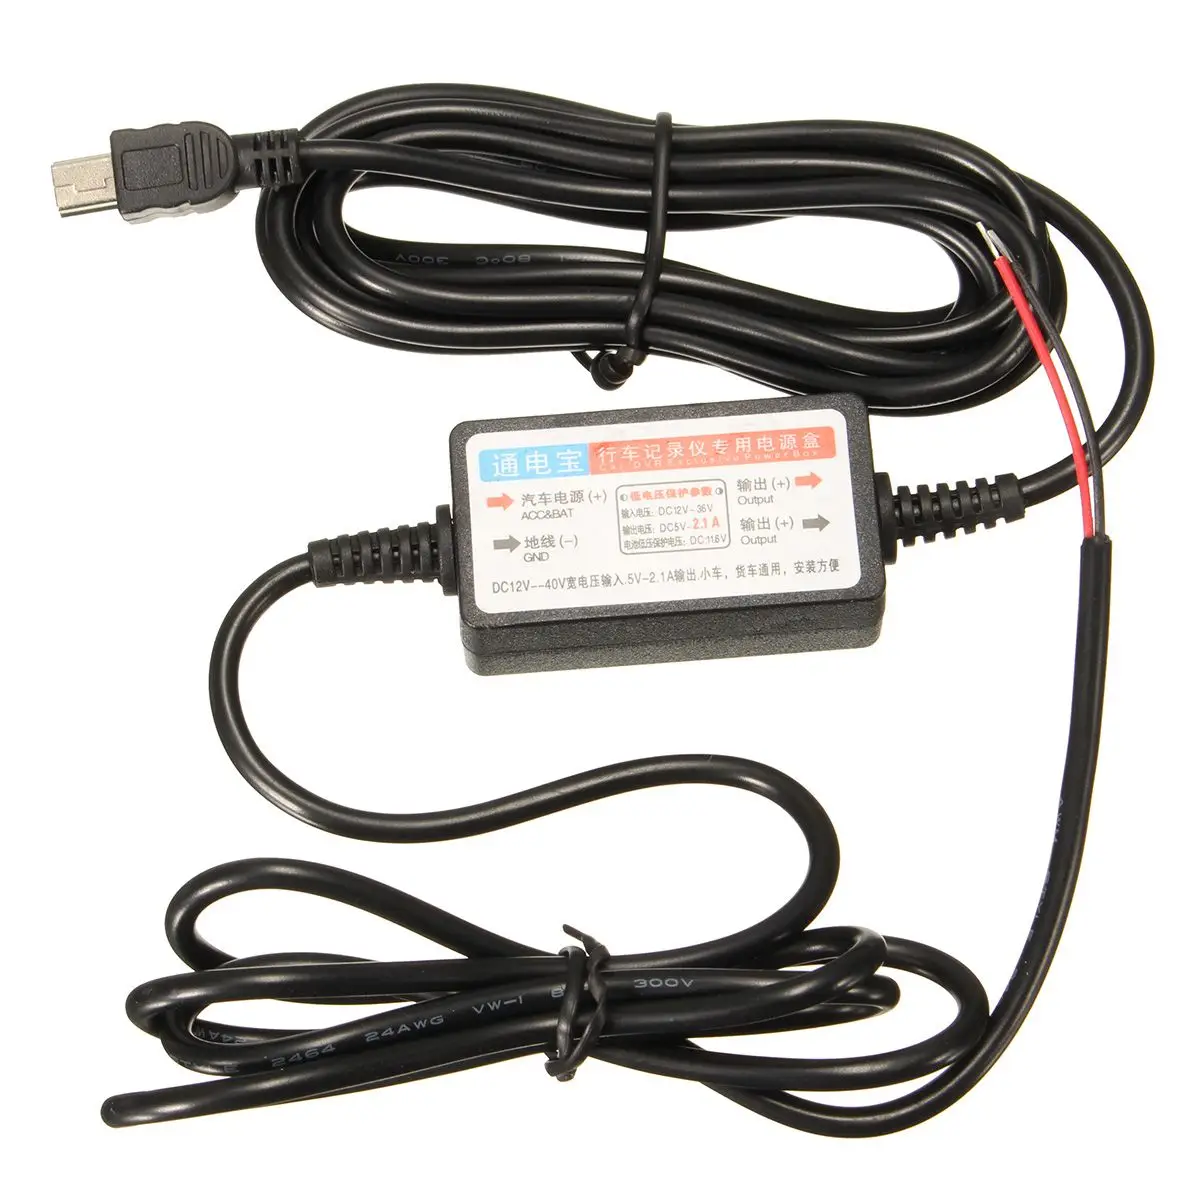 

Car DC 12V to 5V 2A 3.1M Car Charge Cable Mini / Micro USB Hardwire Cord Auto Charging for Dash Cam Camcorder Vehicle DVR